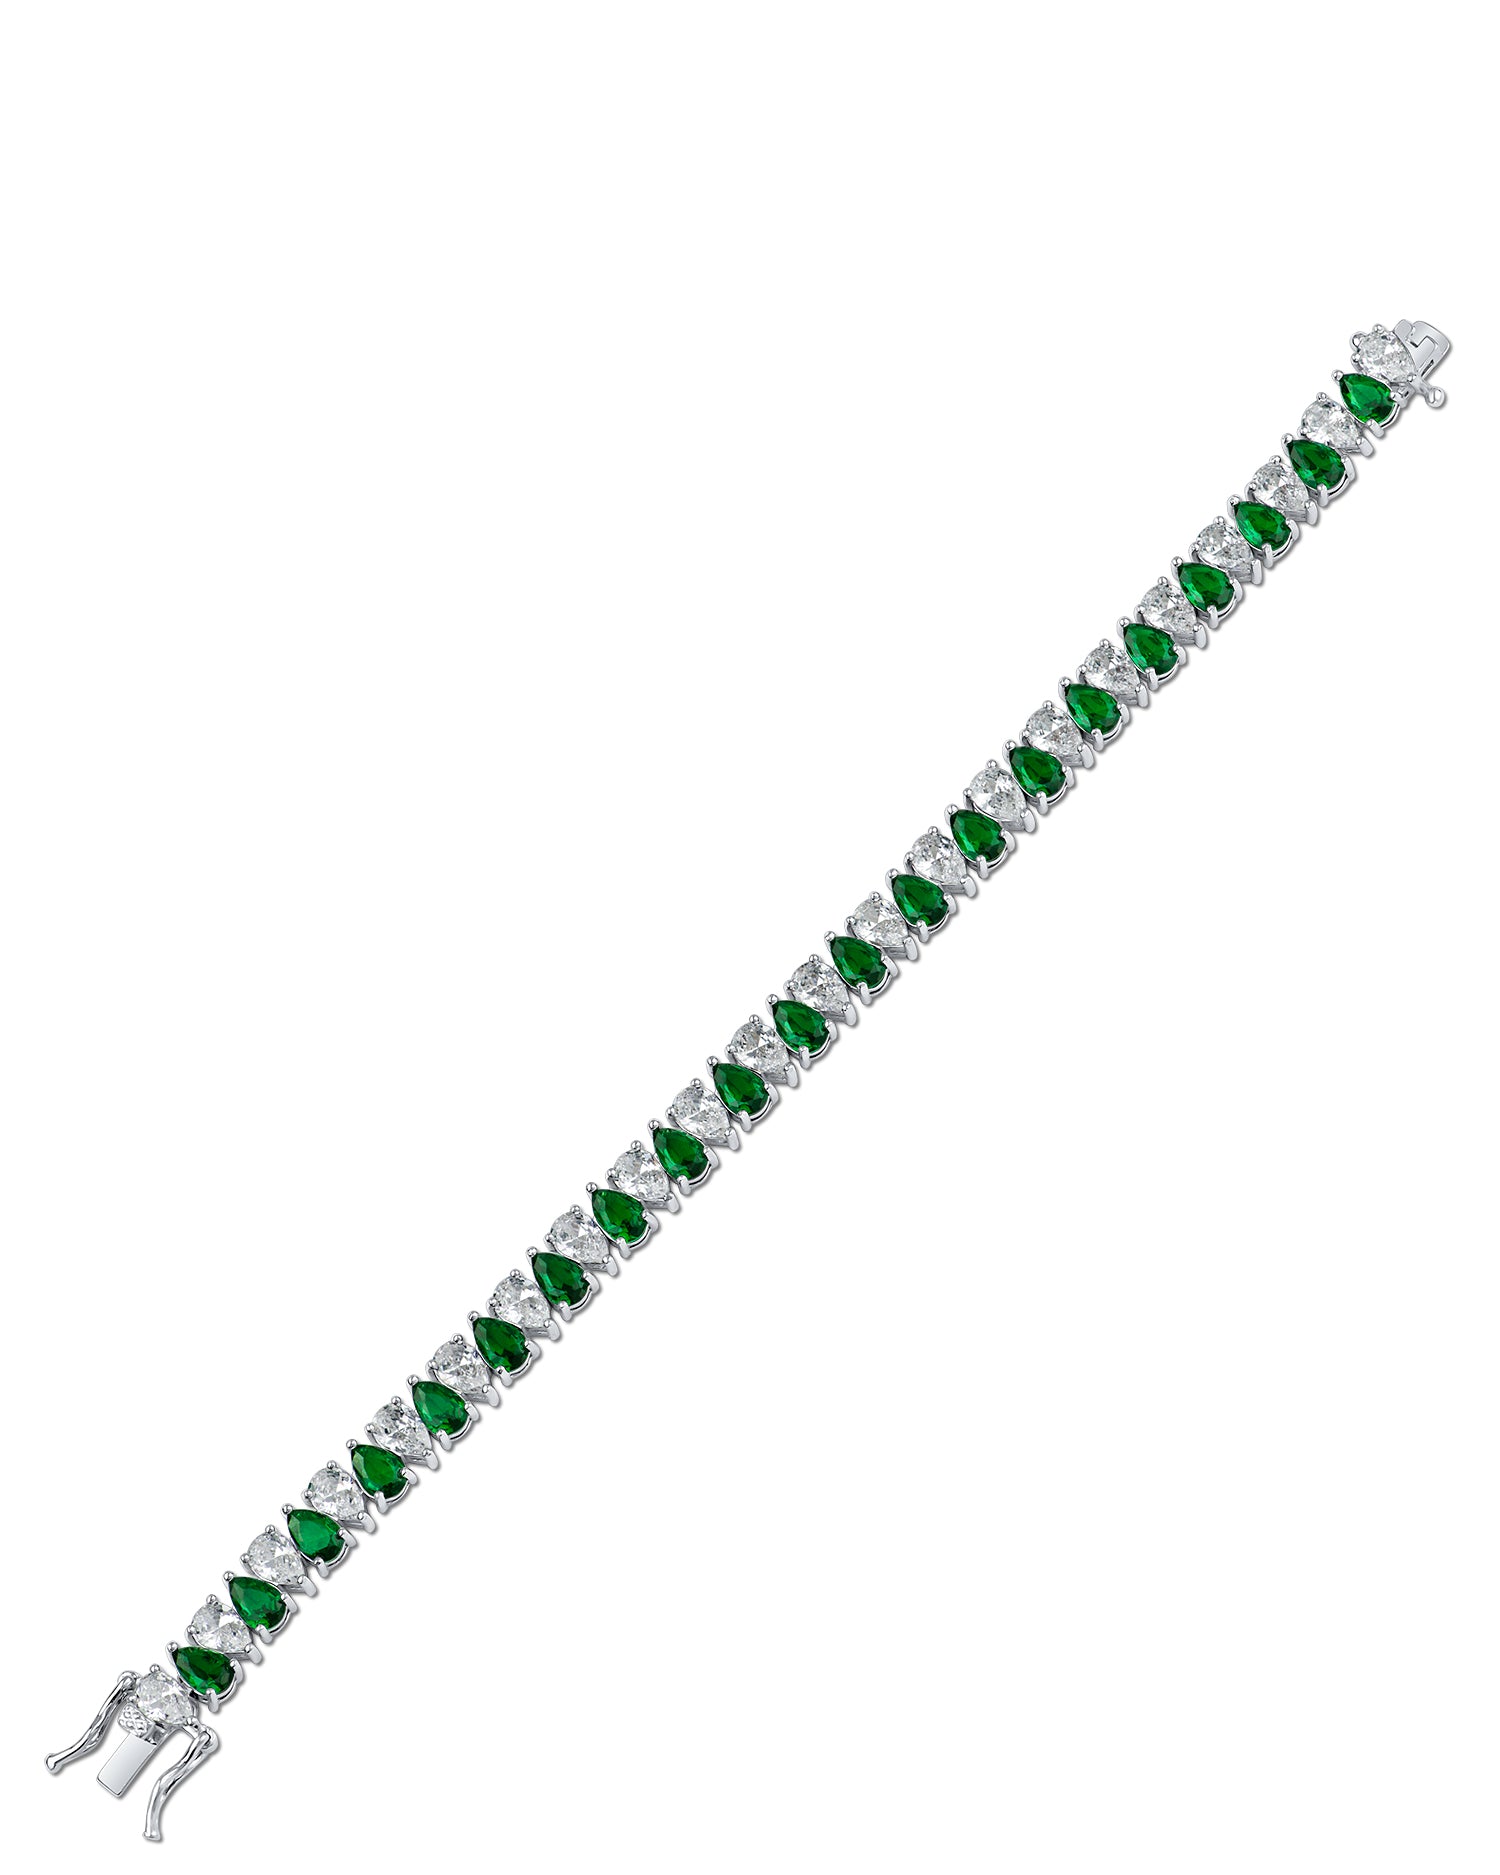 Emerald and Clear Alternating Pear CZ Bracelet